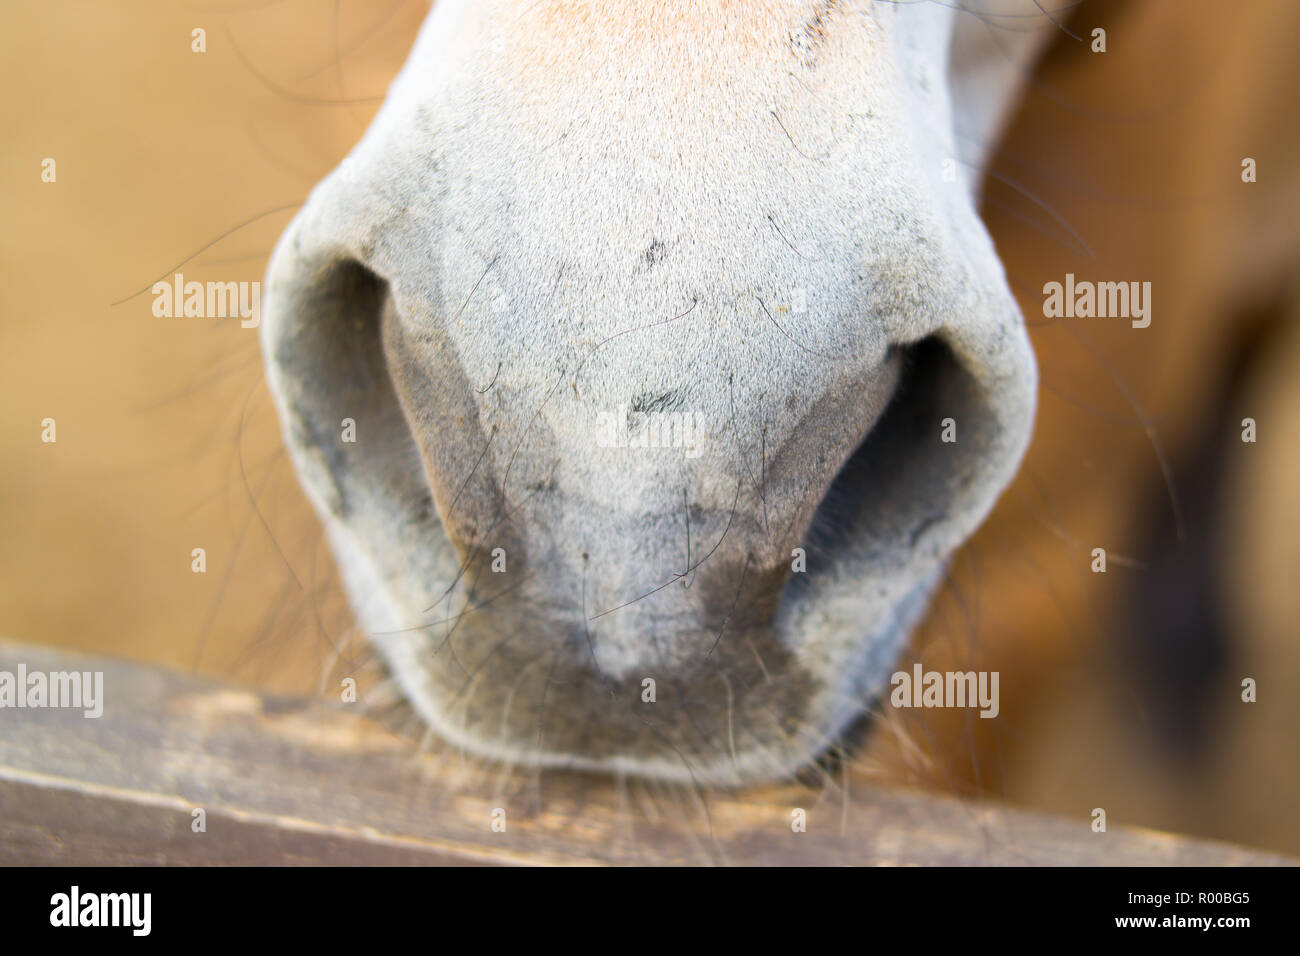 White nose, nostrils of a brown horse. Close-up Stock Photo